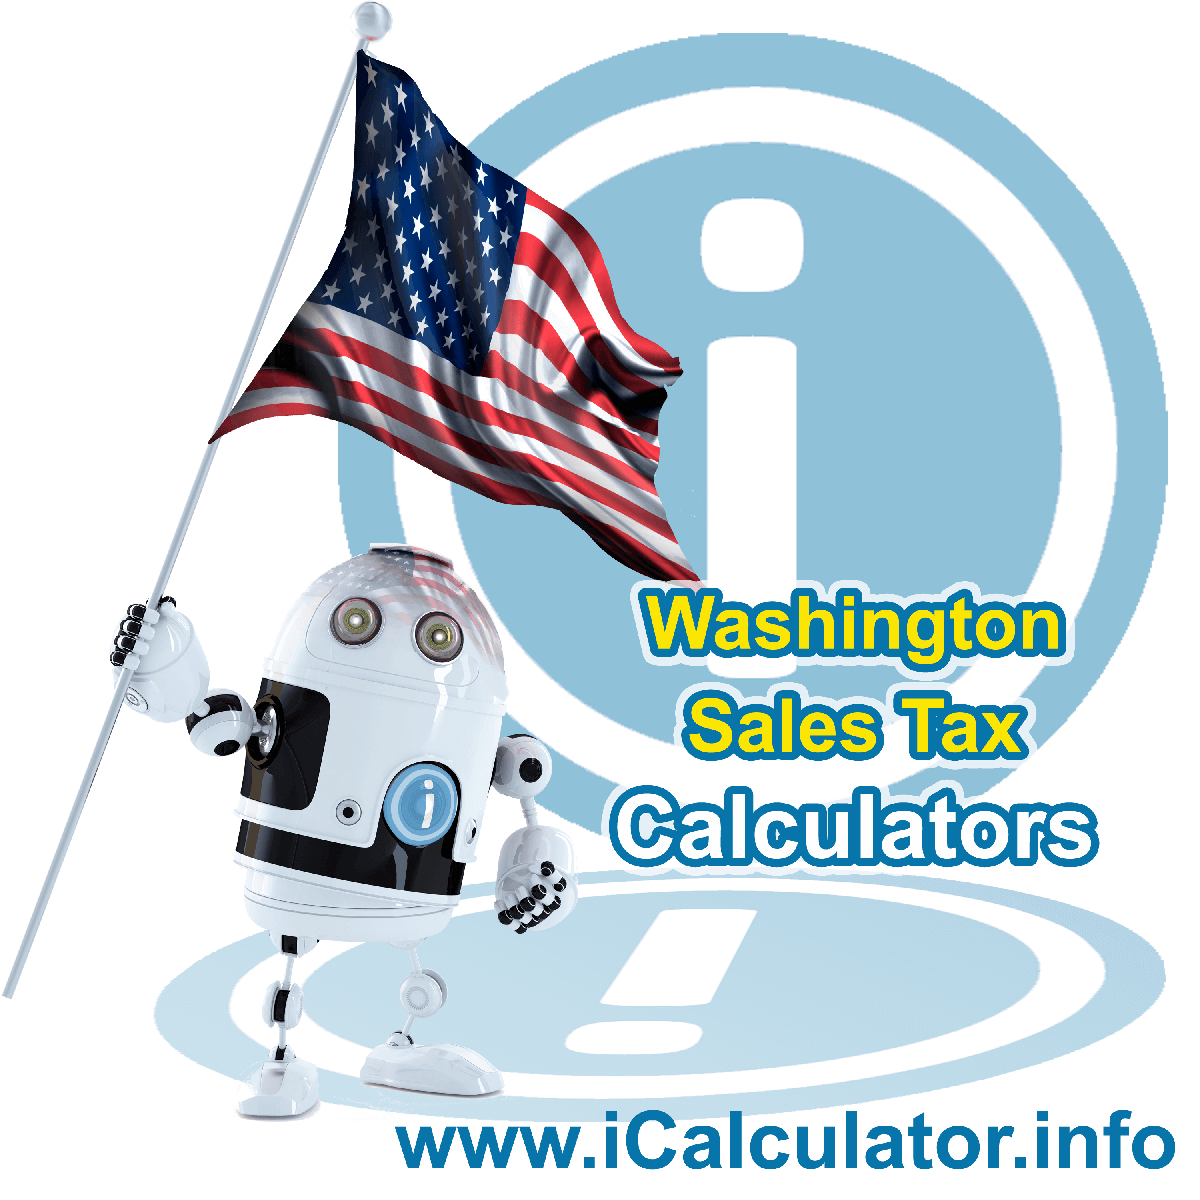 Grant County Sales Rates: This image illustrates a calculator robot calculating Grant County sales tax manually using the Grant County Sales Tax Formula. You can use this information to calculate Grant County Sales Tax manually or use the Grant County Sales Tax Calculator to calculate sales tax online.